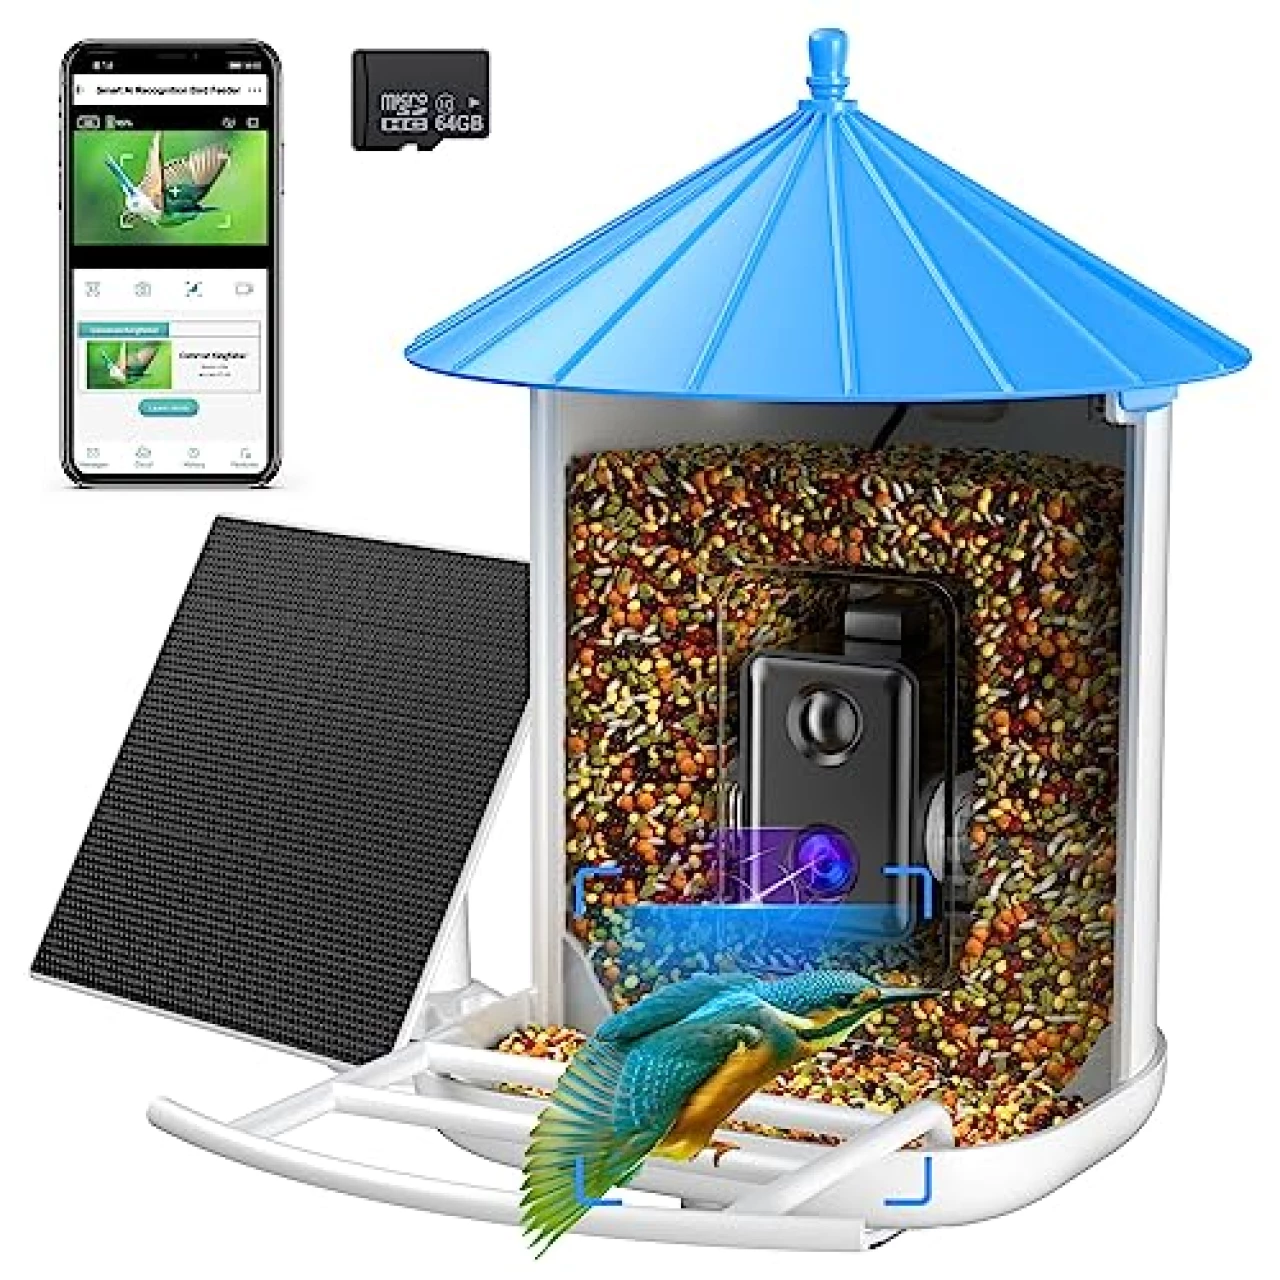 isYoung Smart Bird Feeder with Camera, Free AI to Identify 11000+ Bird Species, Auto Capture Bird Videos &amp; Solar Panel with 64G TF Card, Ideal Gift for Bird Lover